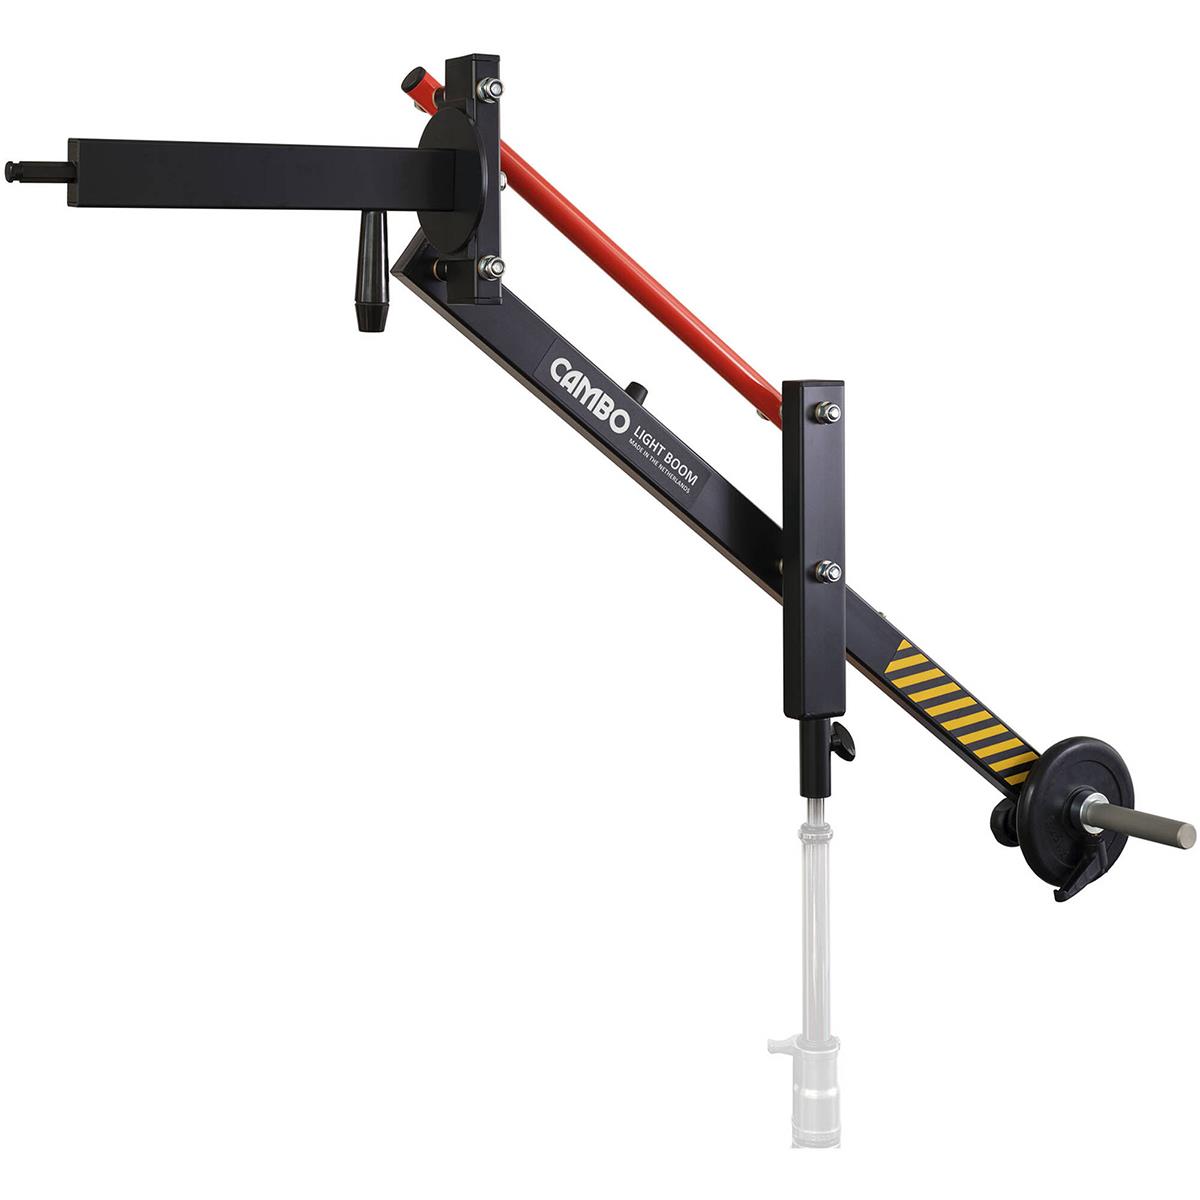 Image of Cambo RD-1105 Redwing Compact Boom Arm for Light Fixtures